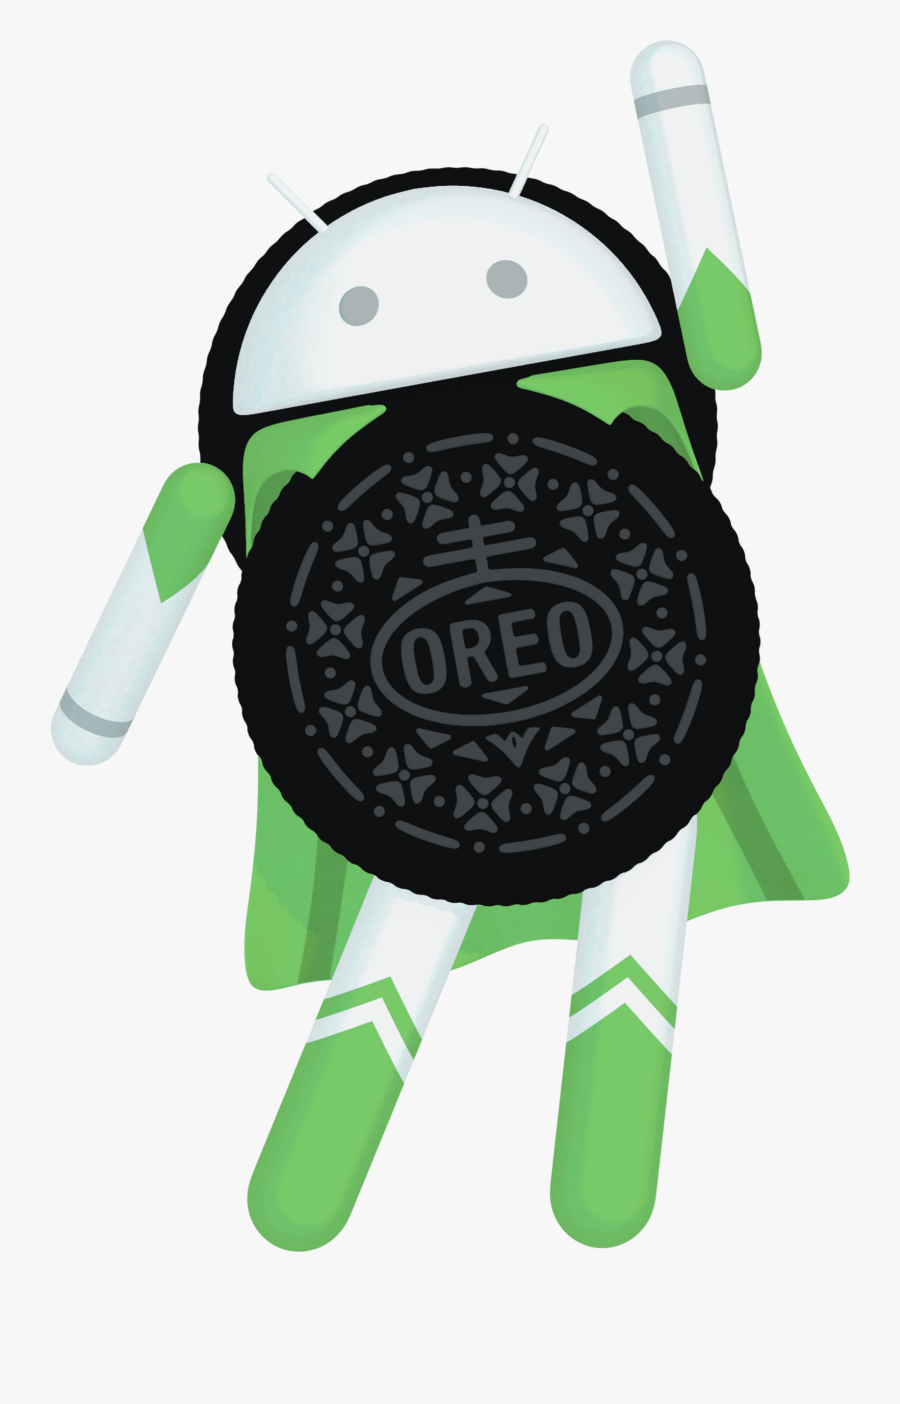 Pie Download Official Oreo - Android 8.0 Oreo Logo, Transparent Clipart